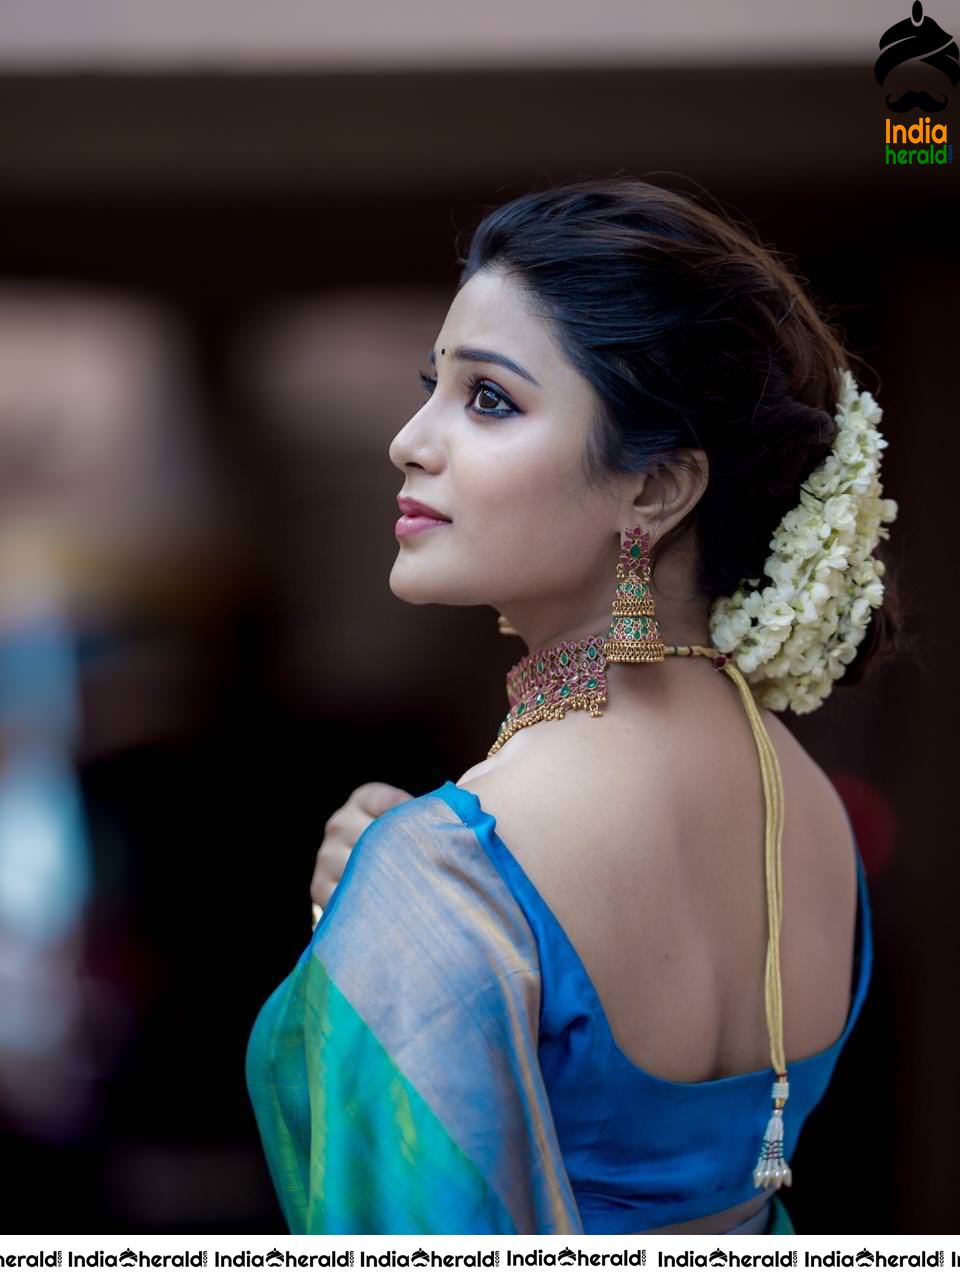 Aathmika is too gorgeous and traditional in Saree